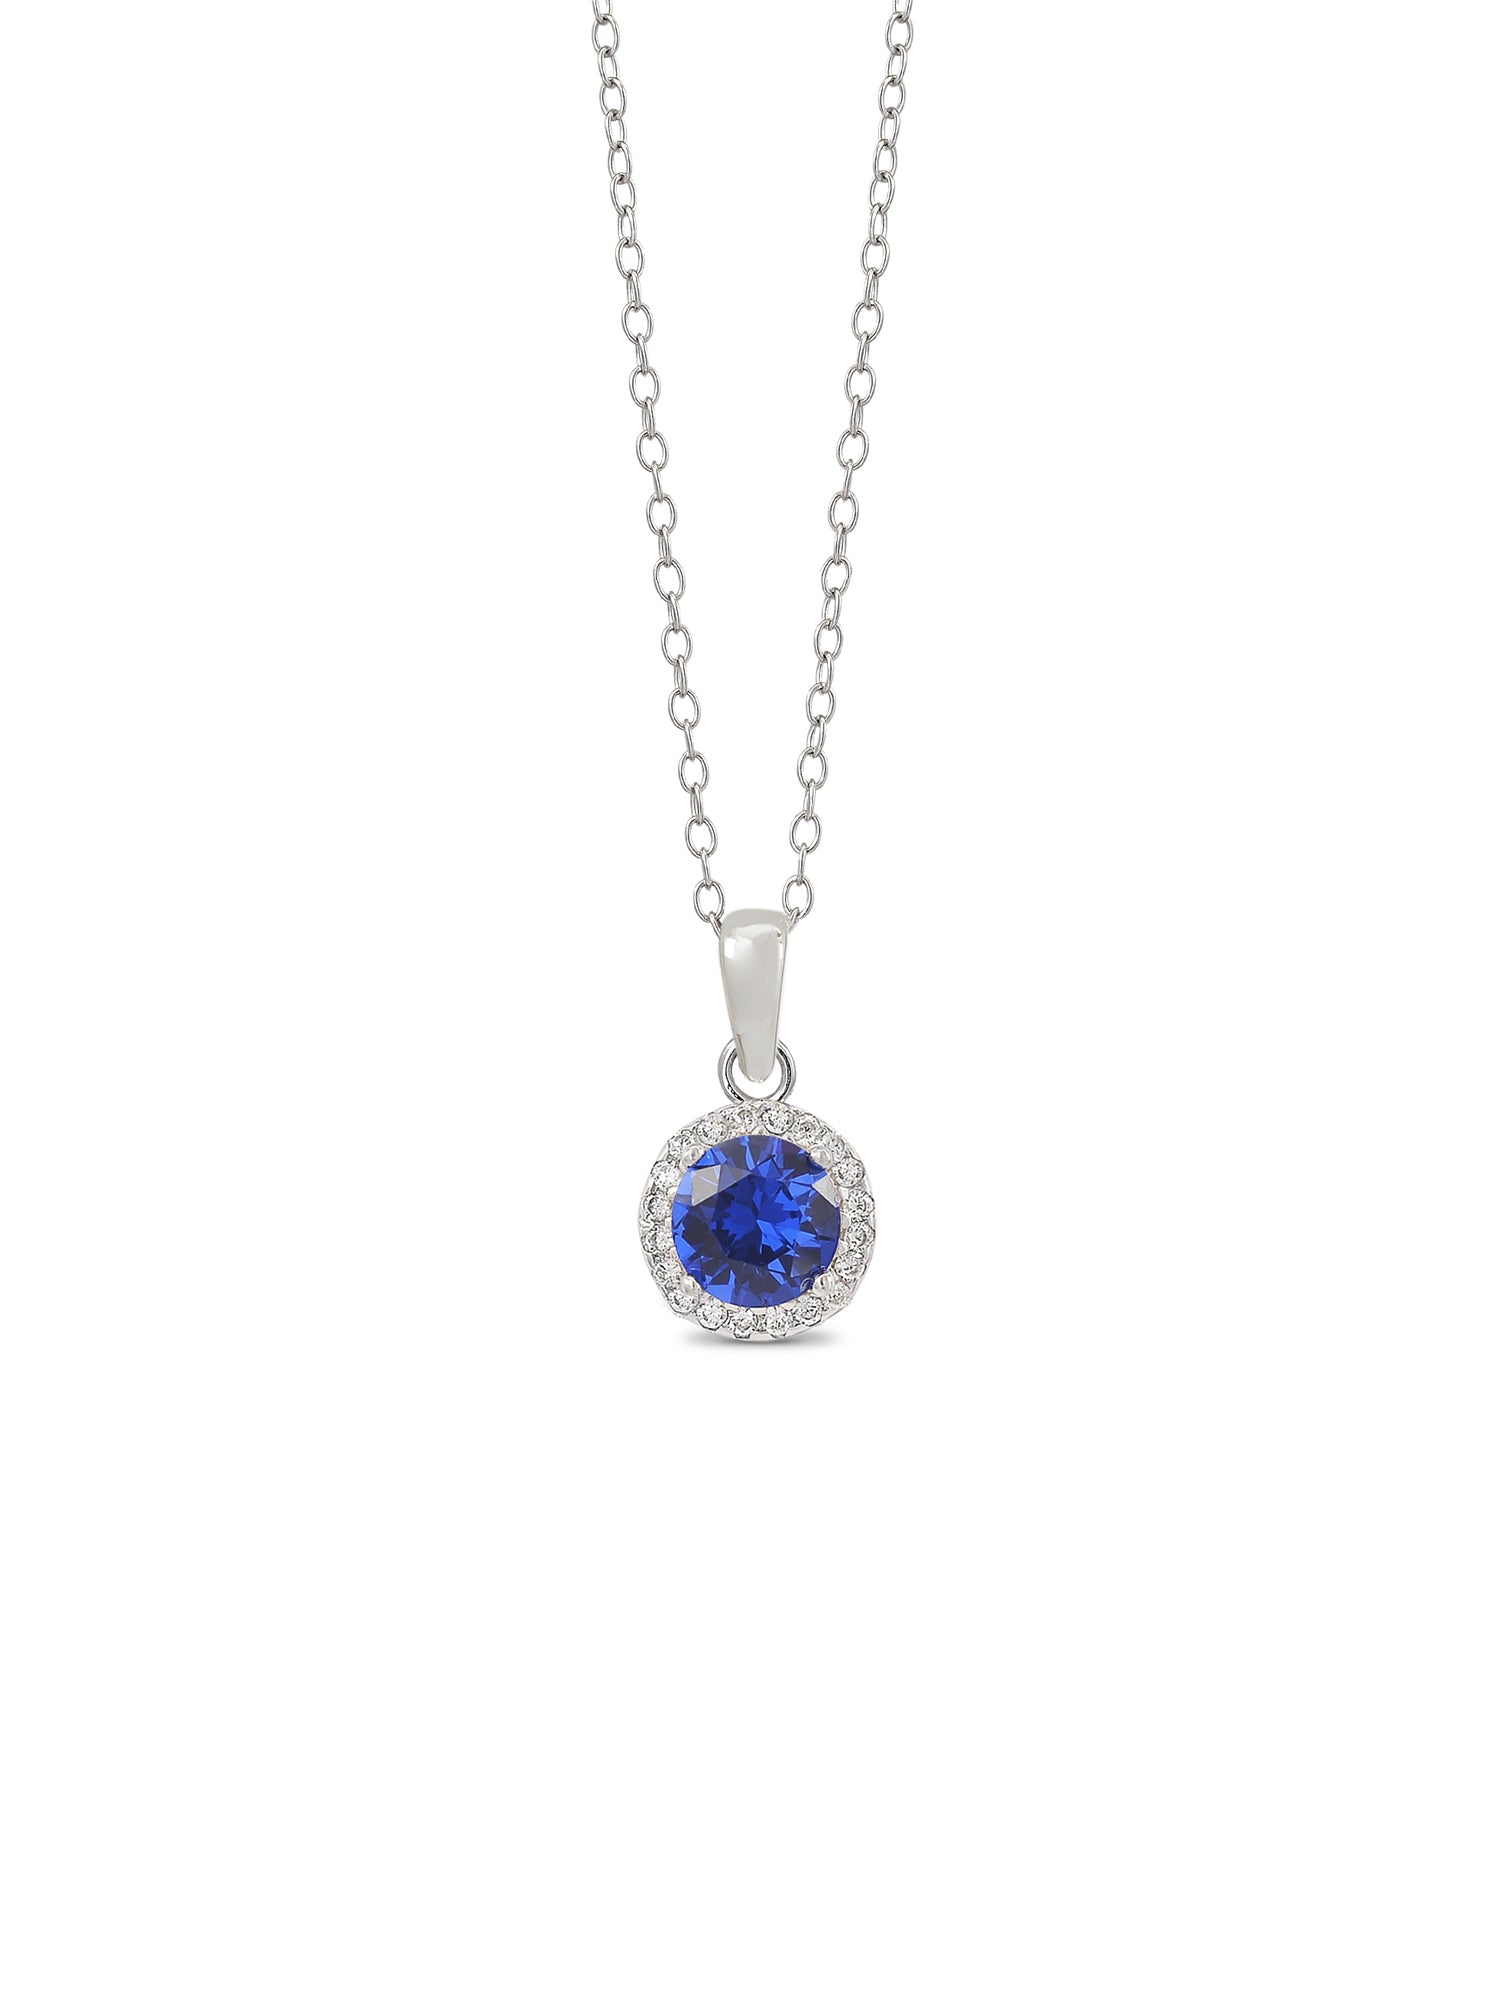 STERLING SILVER BLUE SAPPHIRE HALO NECKLACE WITH CHAIN-3